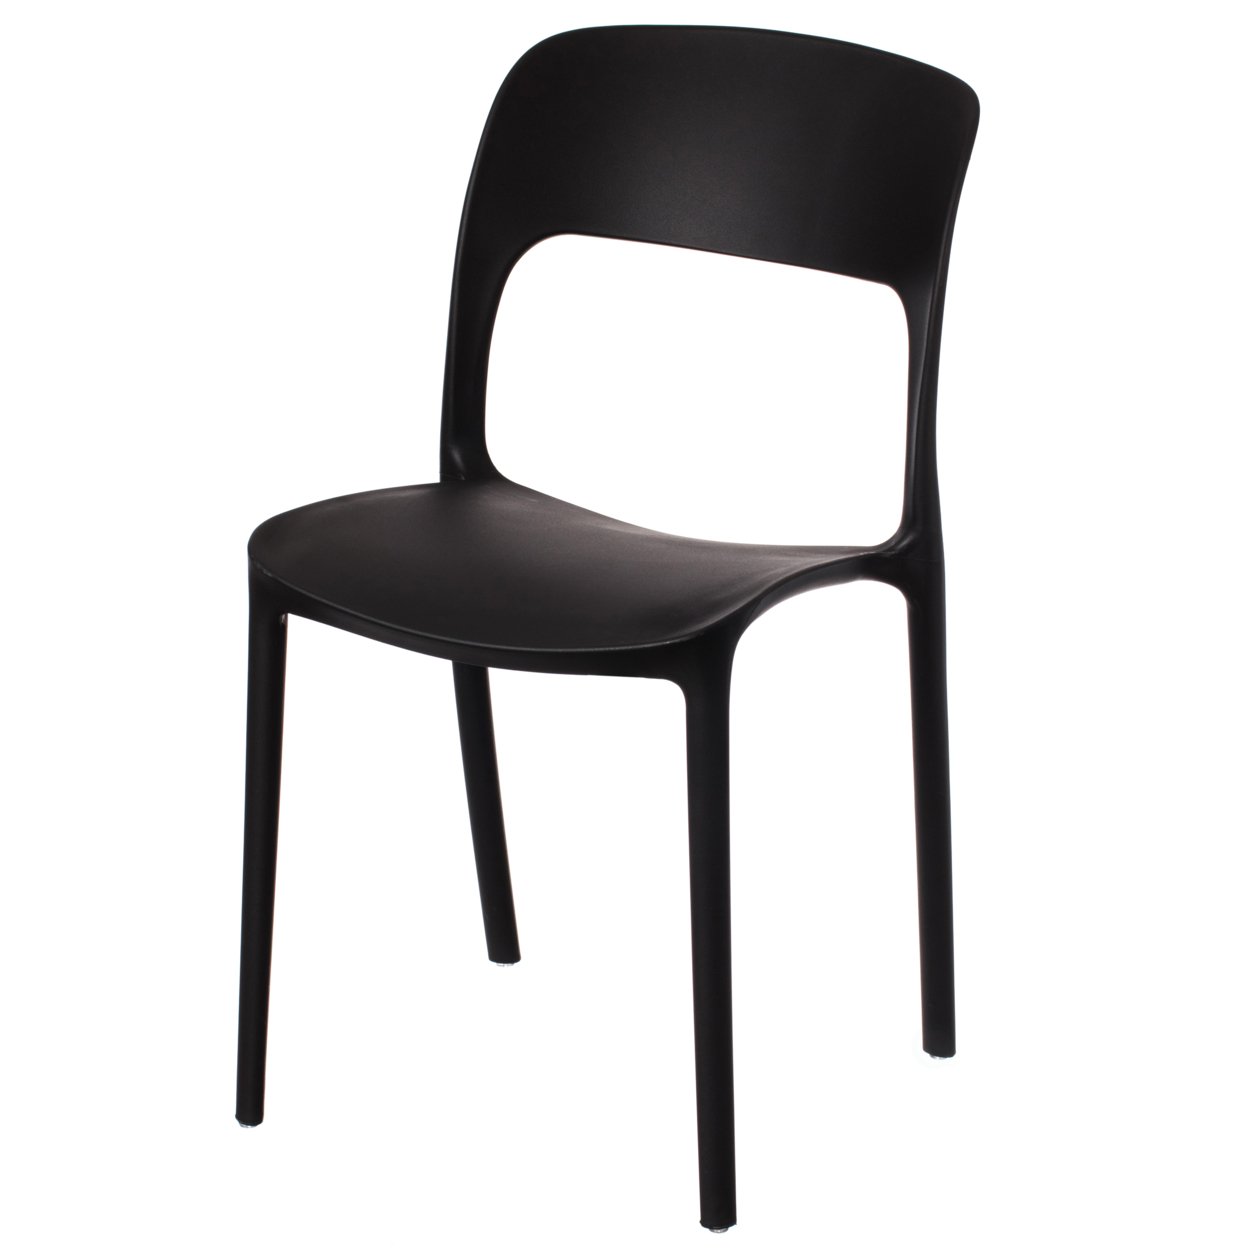 Modern Plastic Outdoor Dining Chair With Open Curved Back - Set Of 2 Black